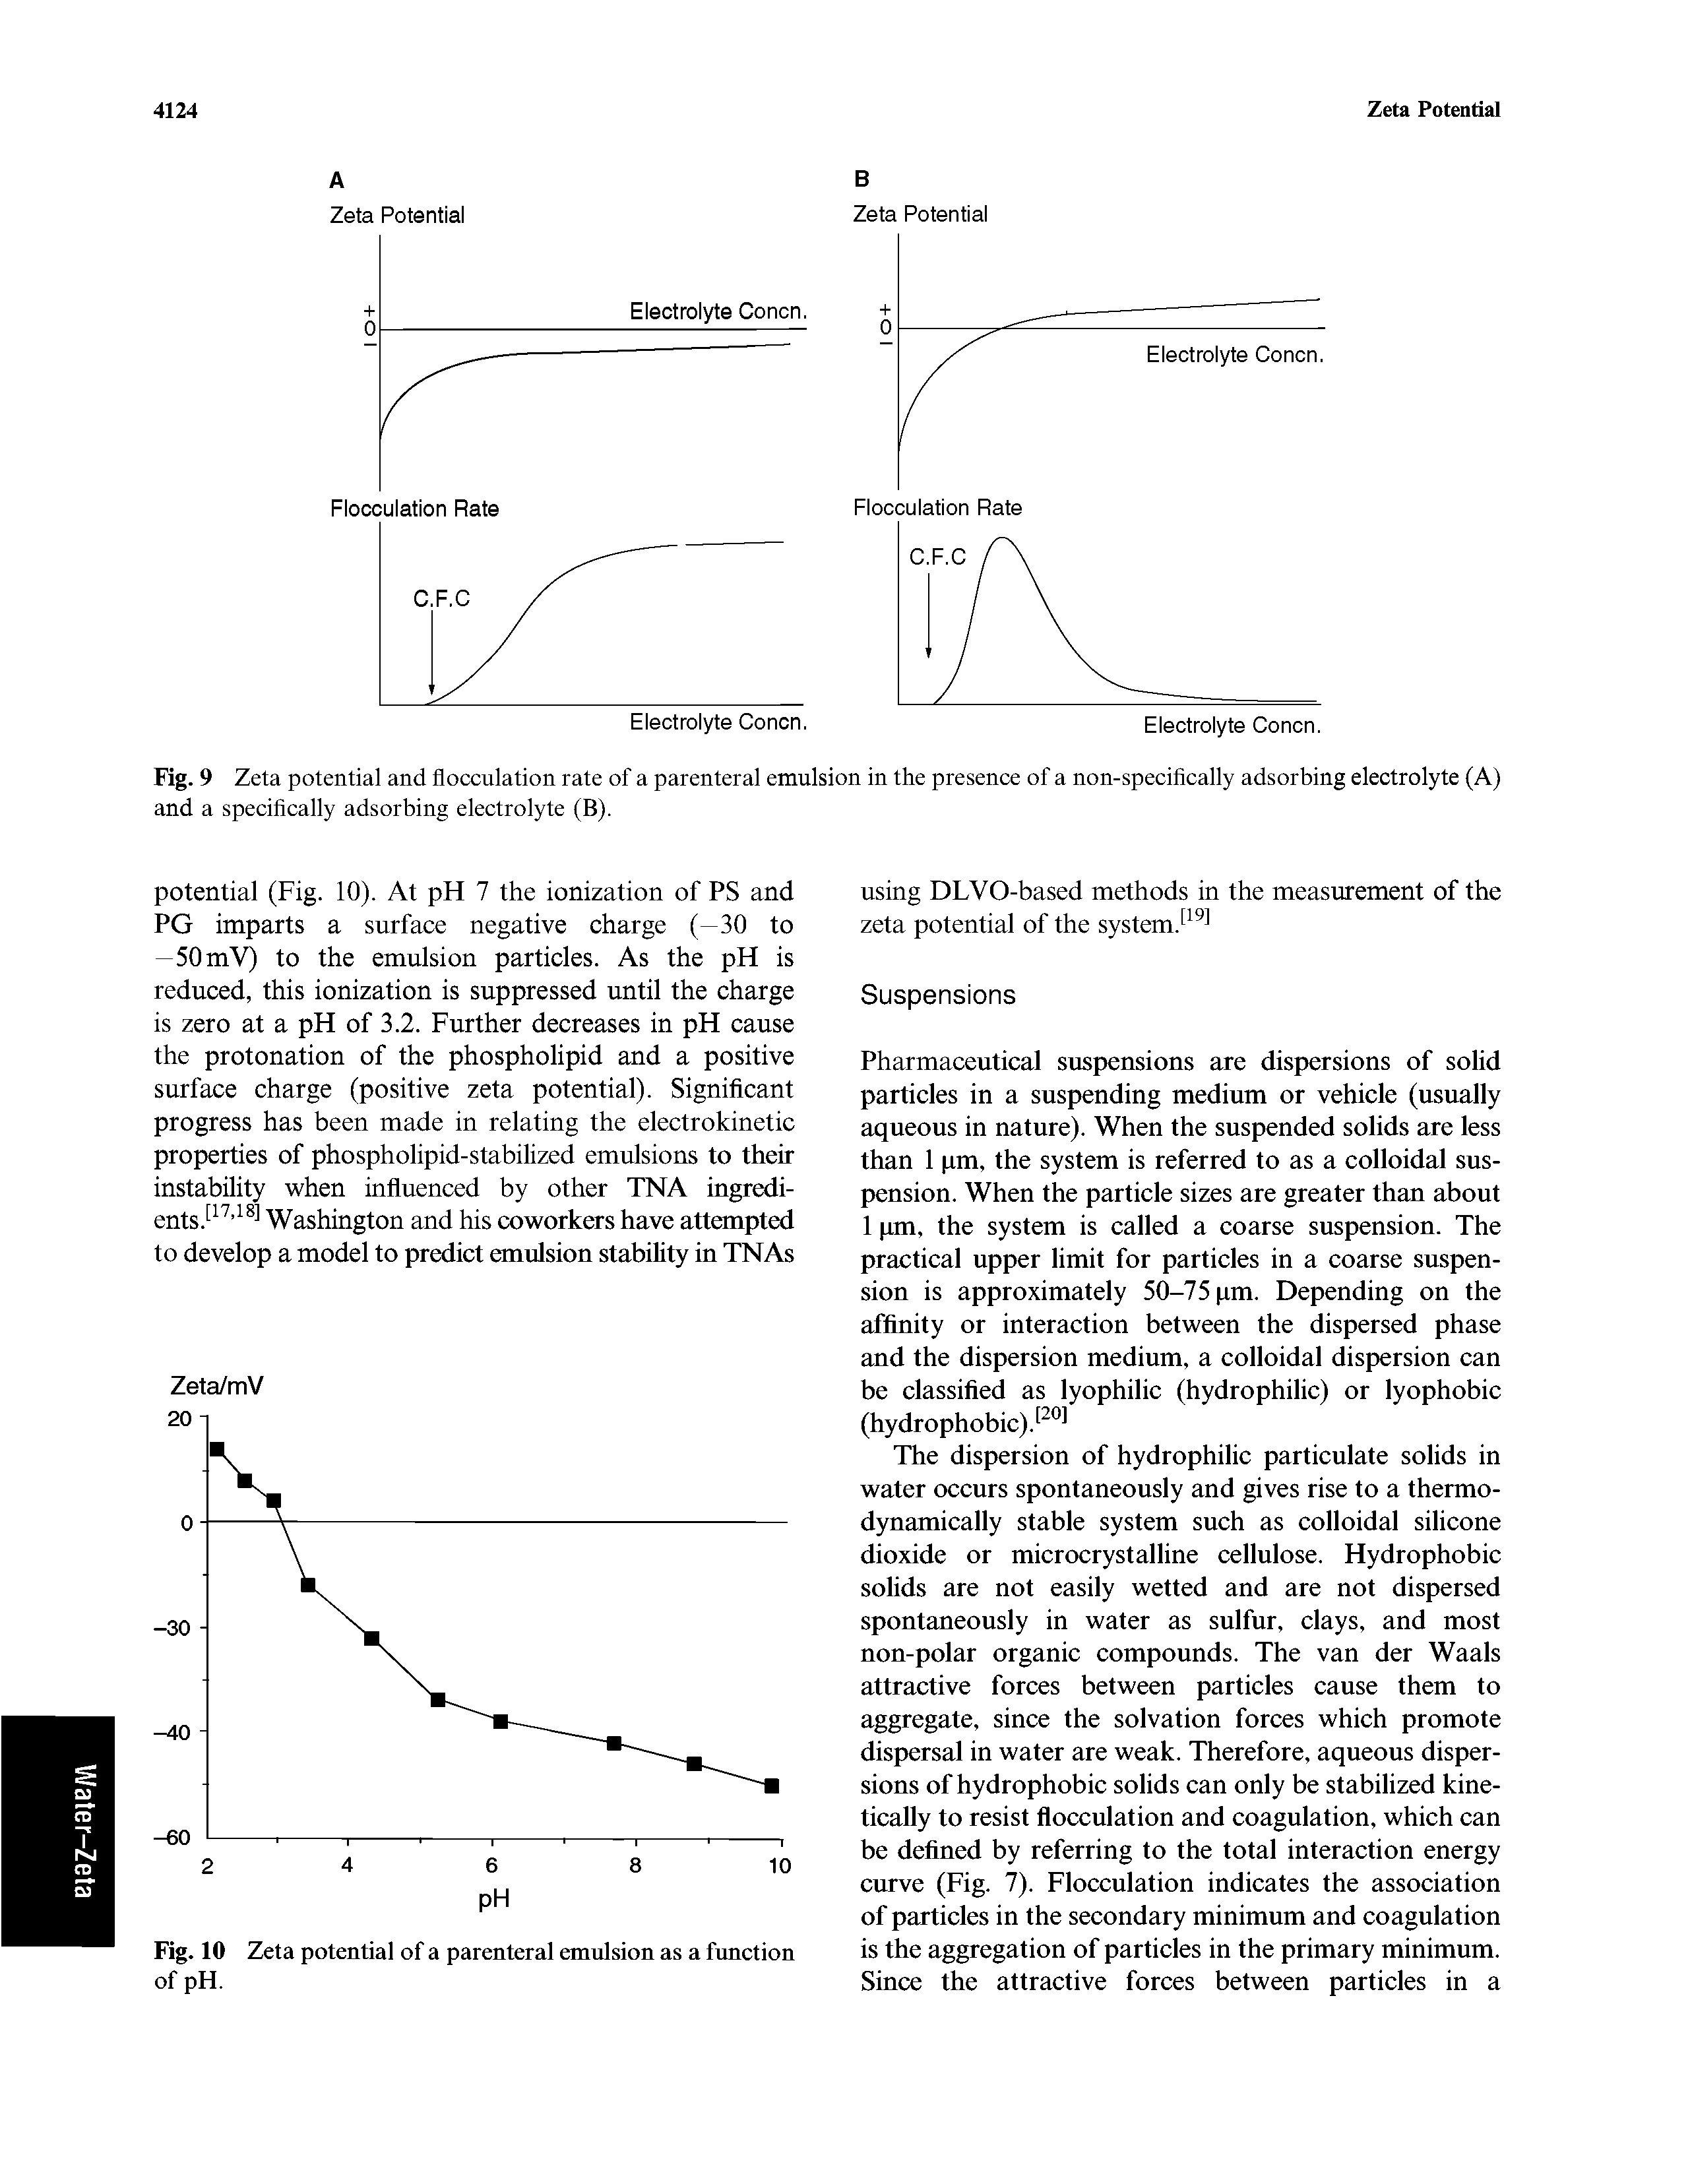 Fig. 9 Zeta potential and flocculation rate of a parenteral emulsion in the presence of a non-specifically adsorbing electrolyte (A) and a specifically adsorbing electrolyte (B).